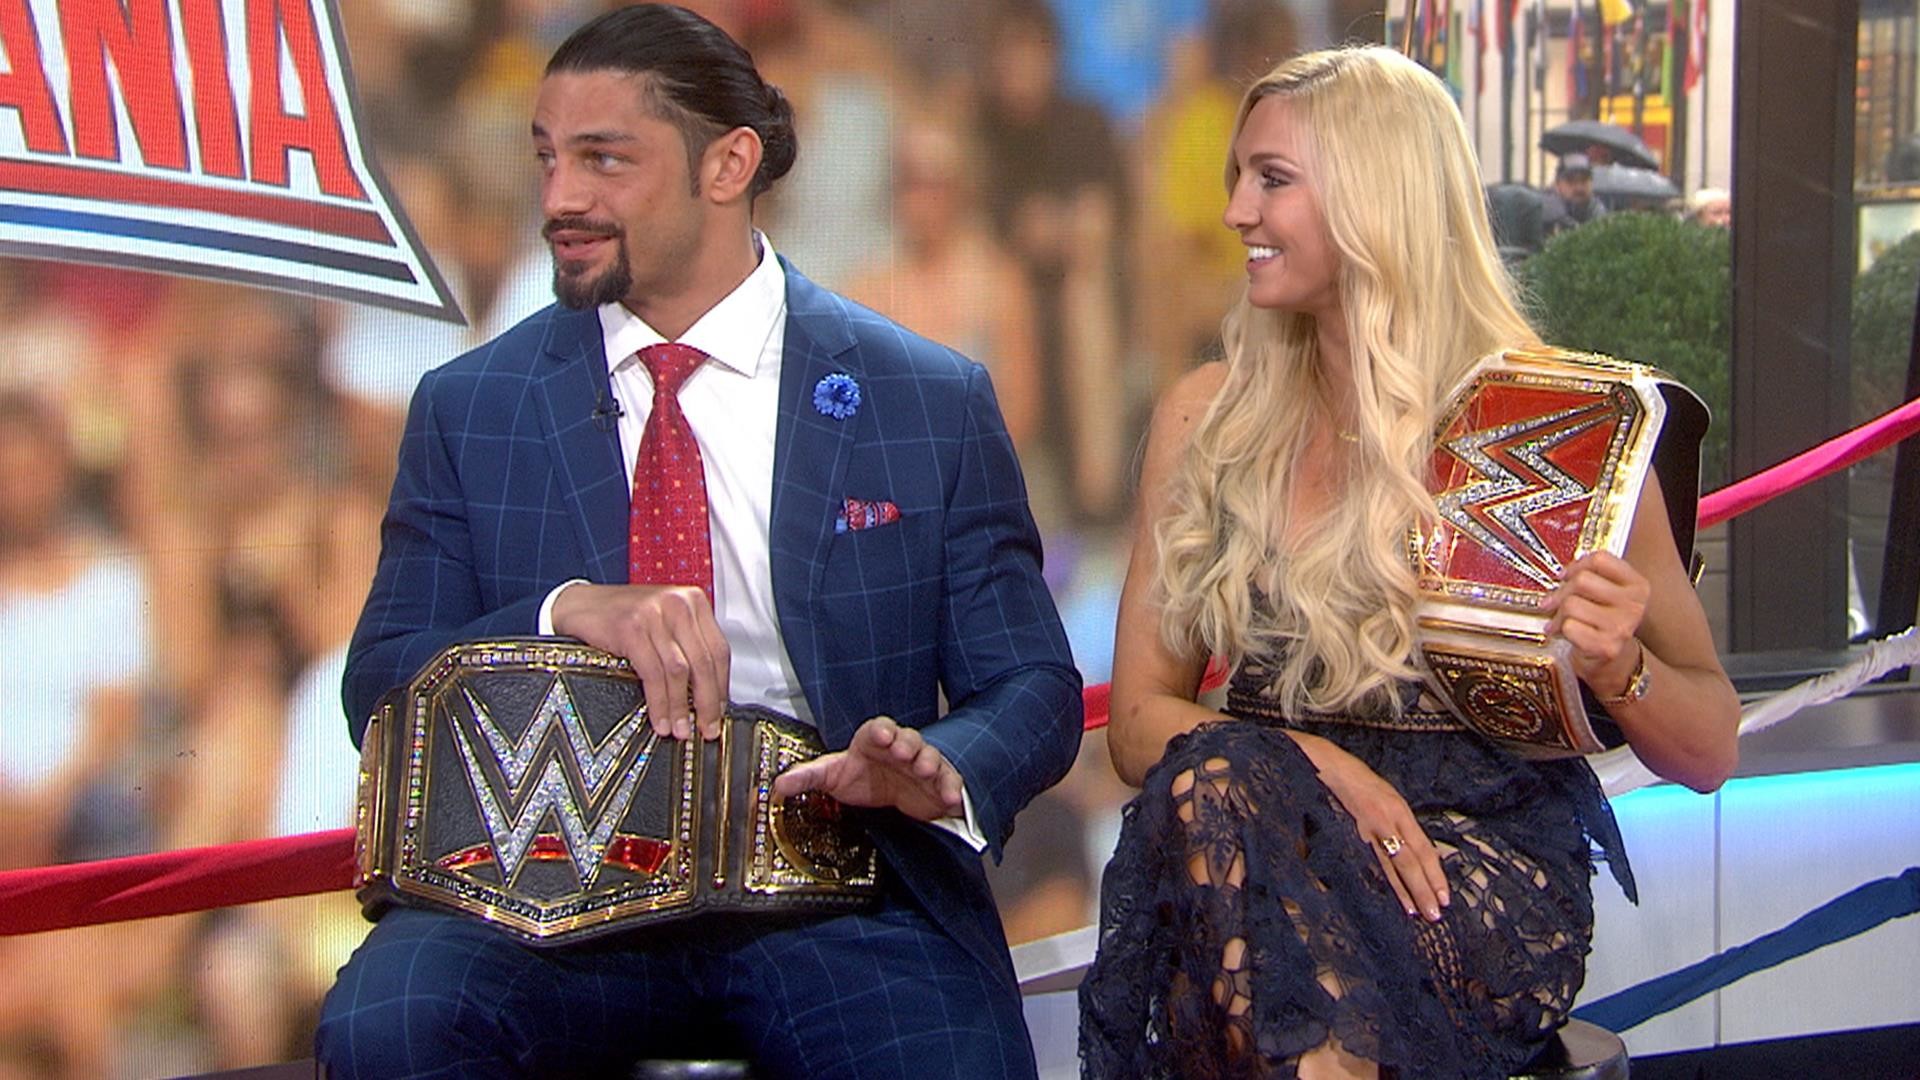 1920x1080 Meet the winners of Wrestlemania 32, Roman Reigns and Charlotte - TODAY.com